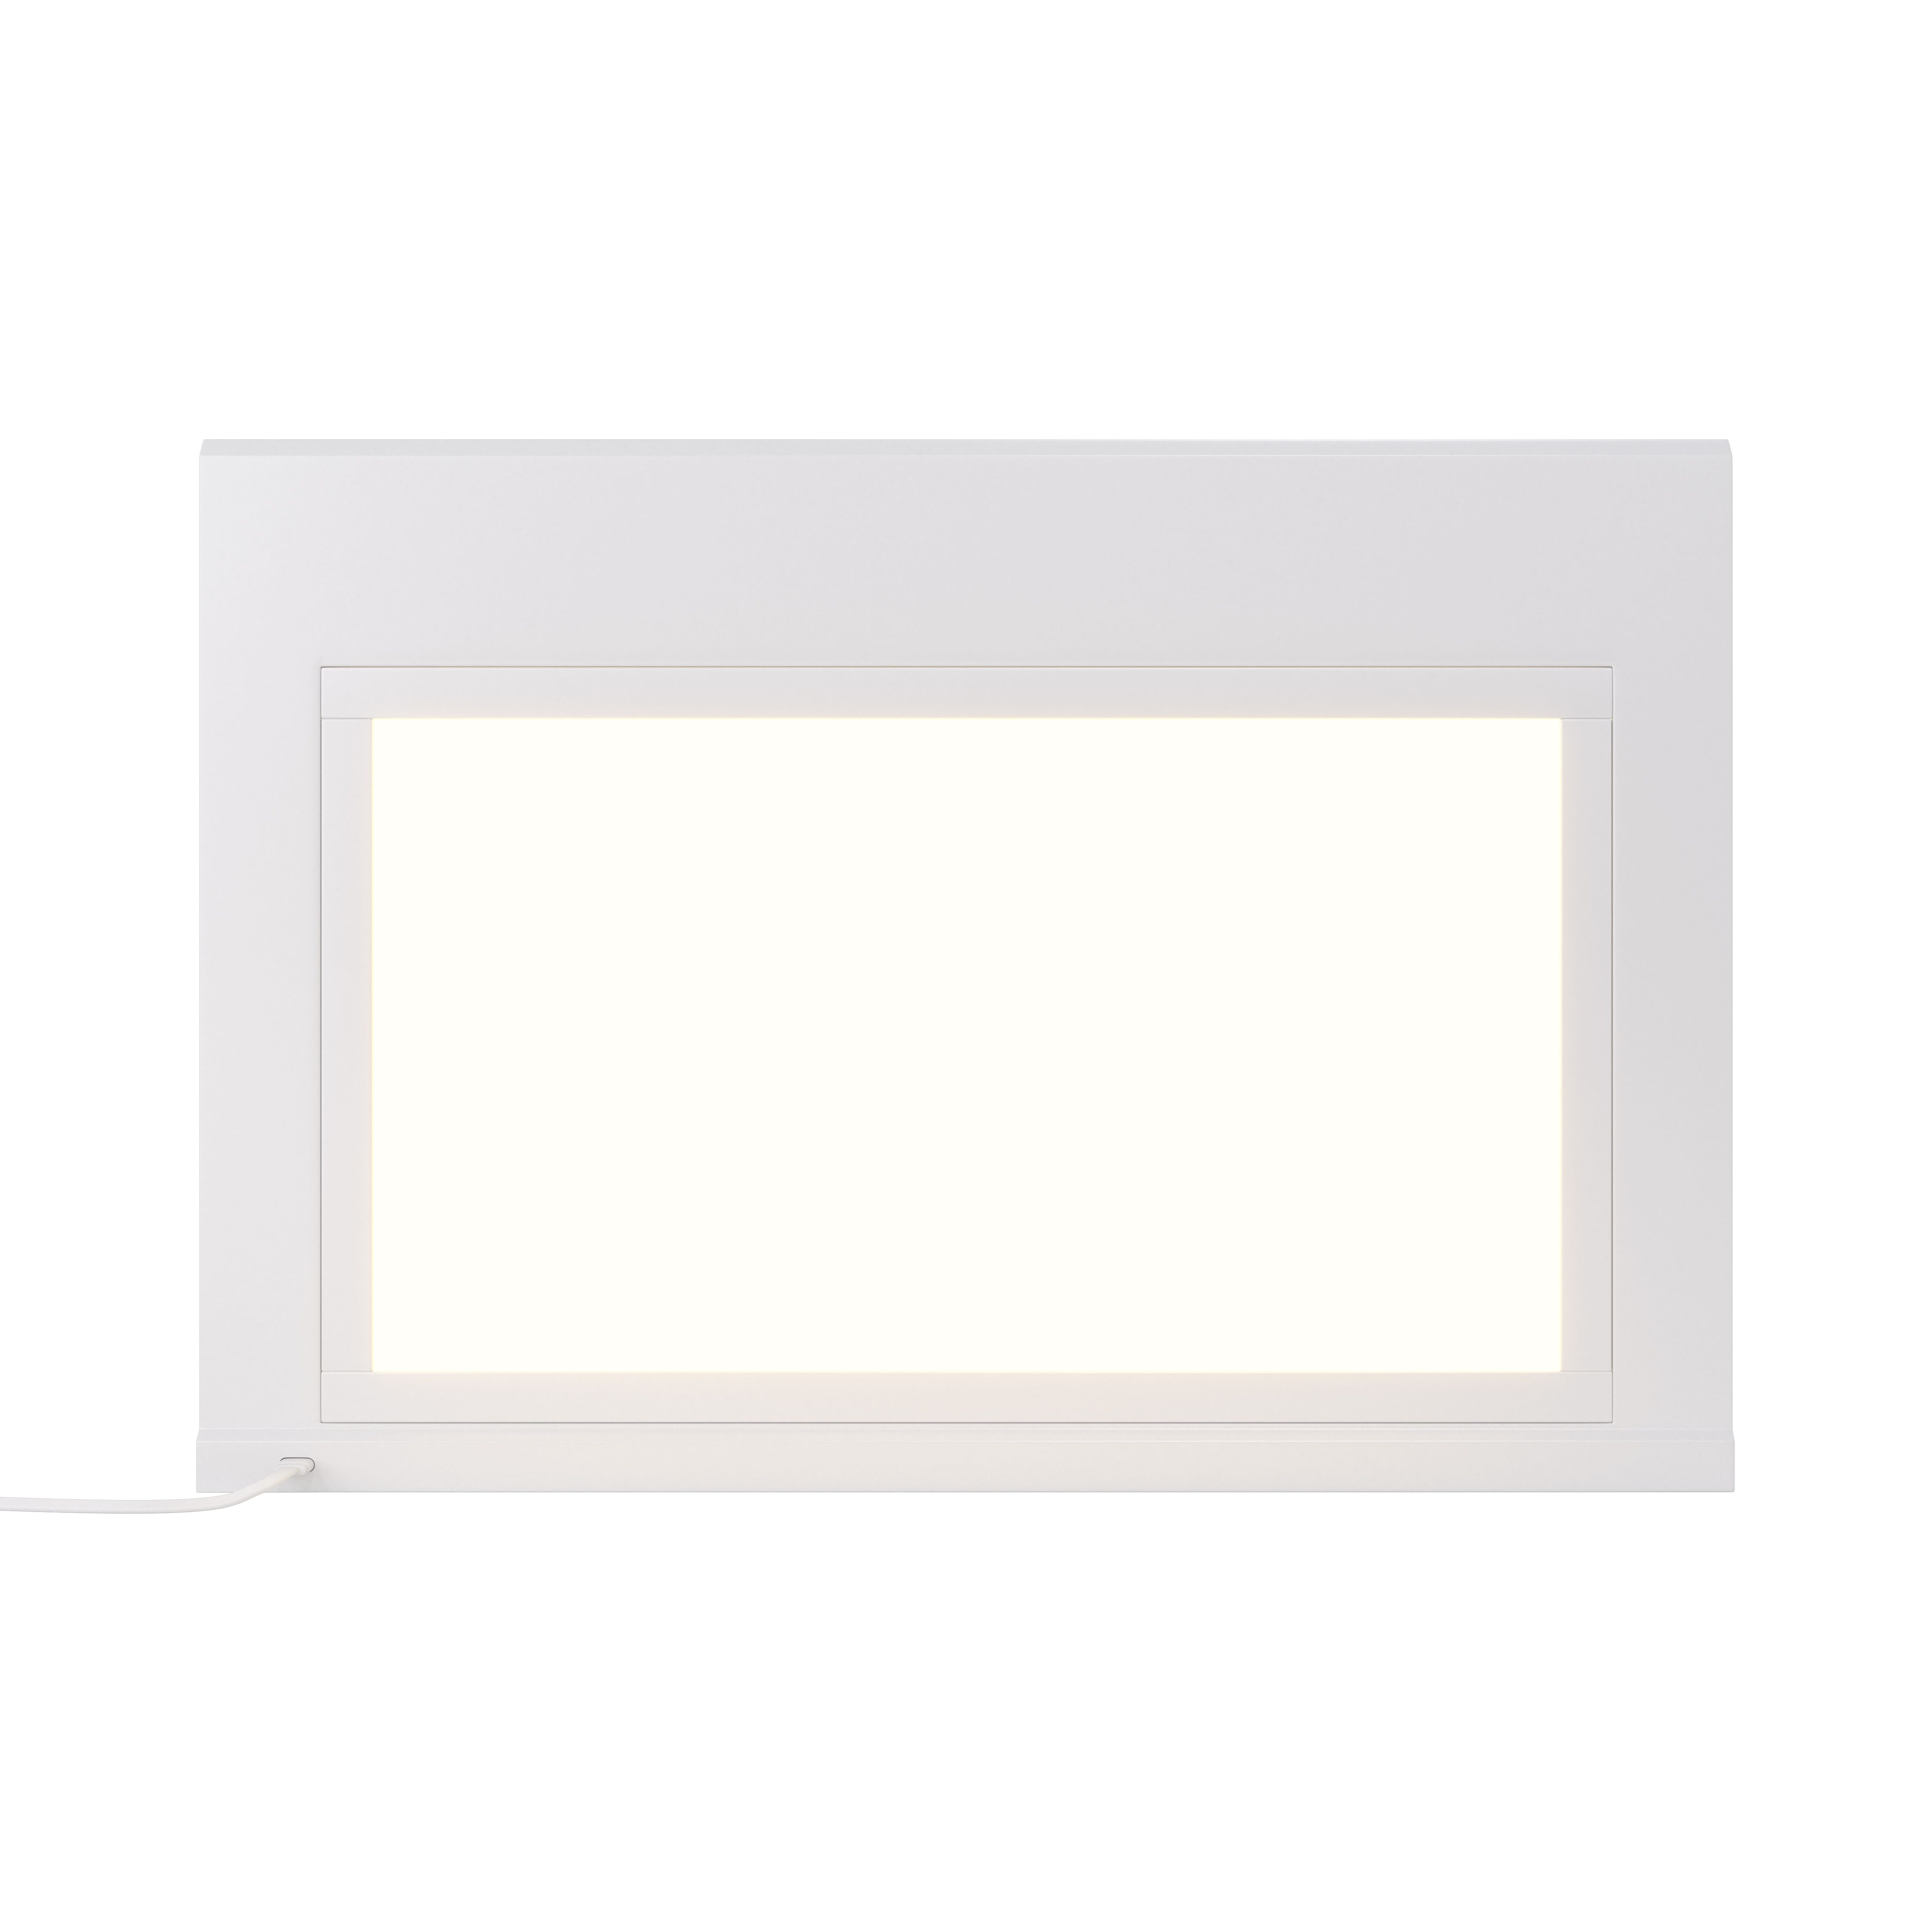 GoodHome Caraway White Mains-powered LED Cool white & warm white Under cabinet light IP20 (L)319mm (W)464mm